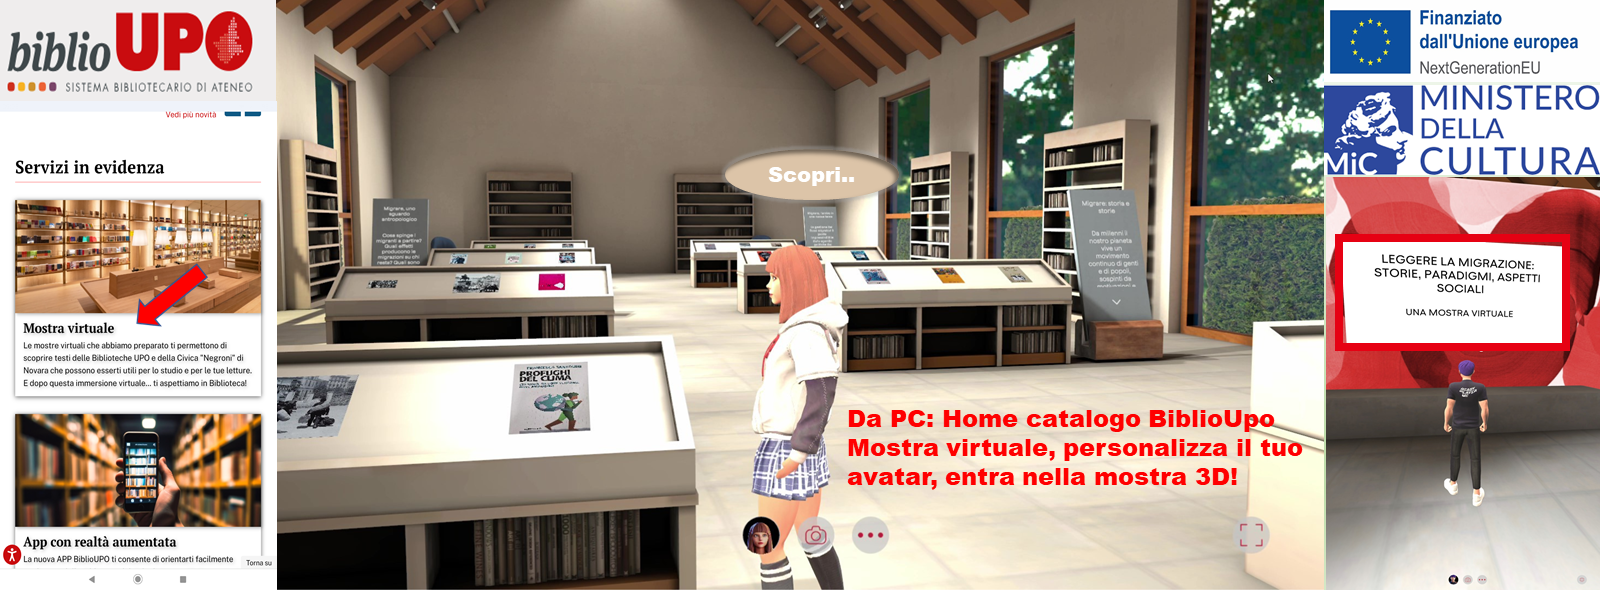 Mostra virtuale 3D